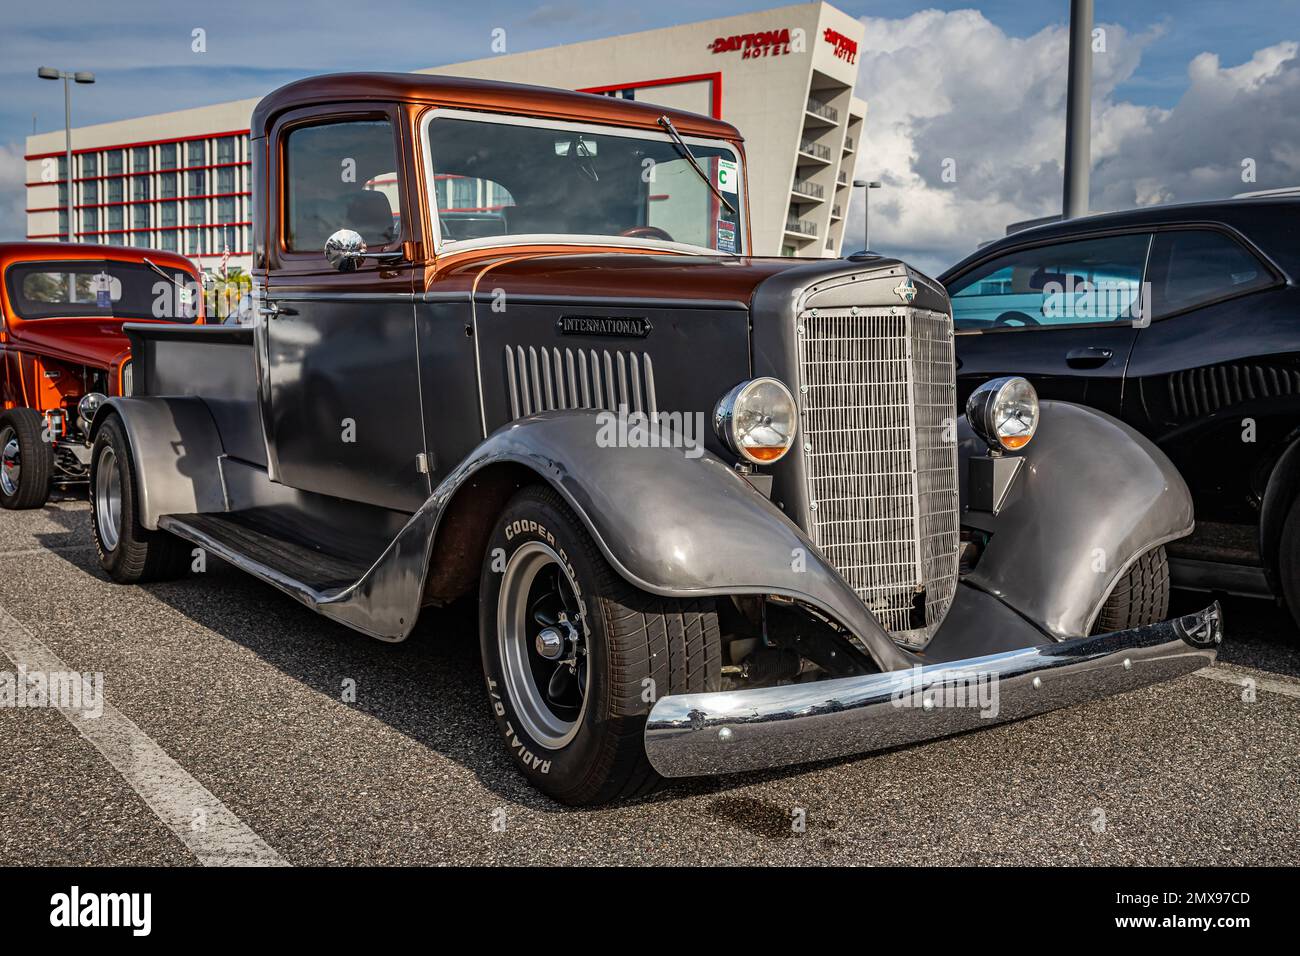 Daytona Beach, FL - November 26, 2022: Low perspective front corner view of a 1936 International Harvester C1 Pickup Truck at a local car show. Stock Photo